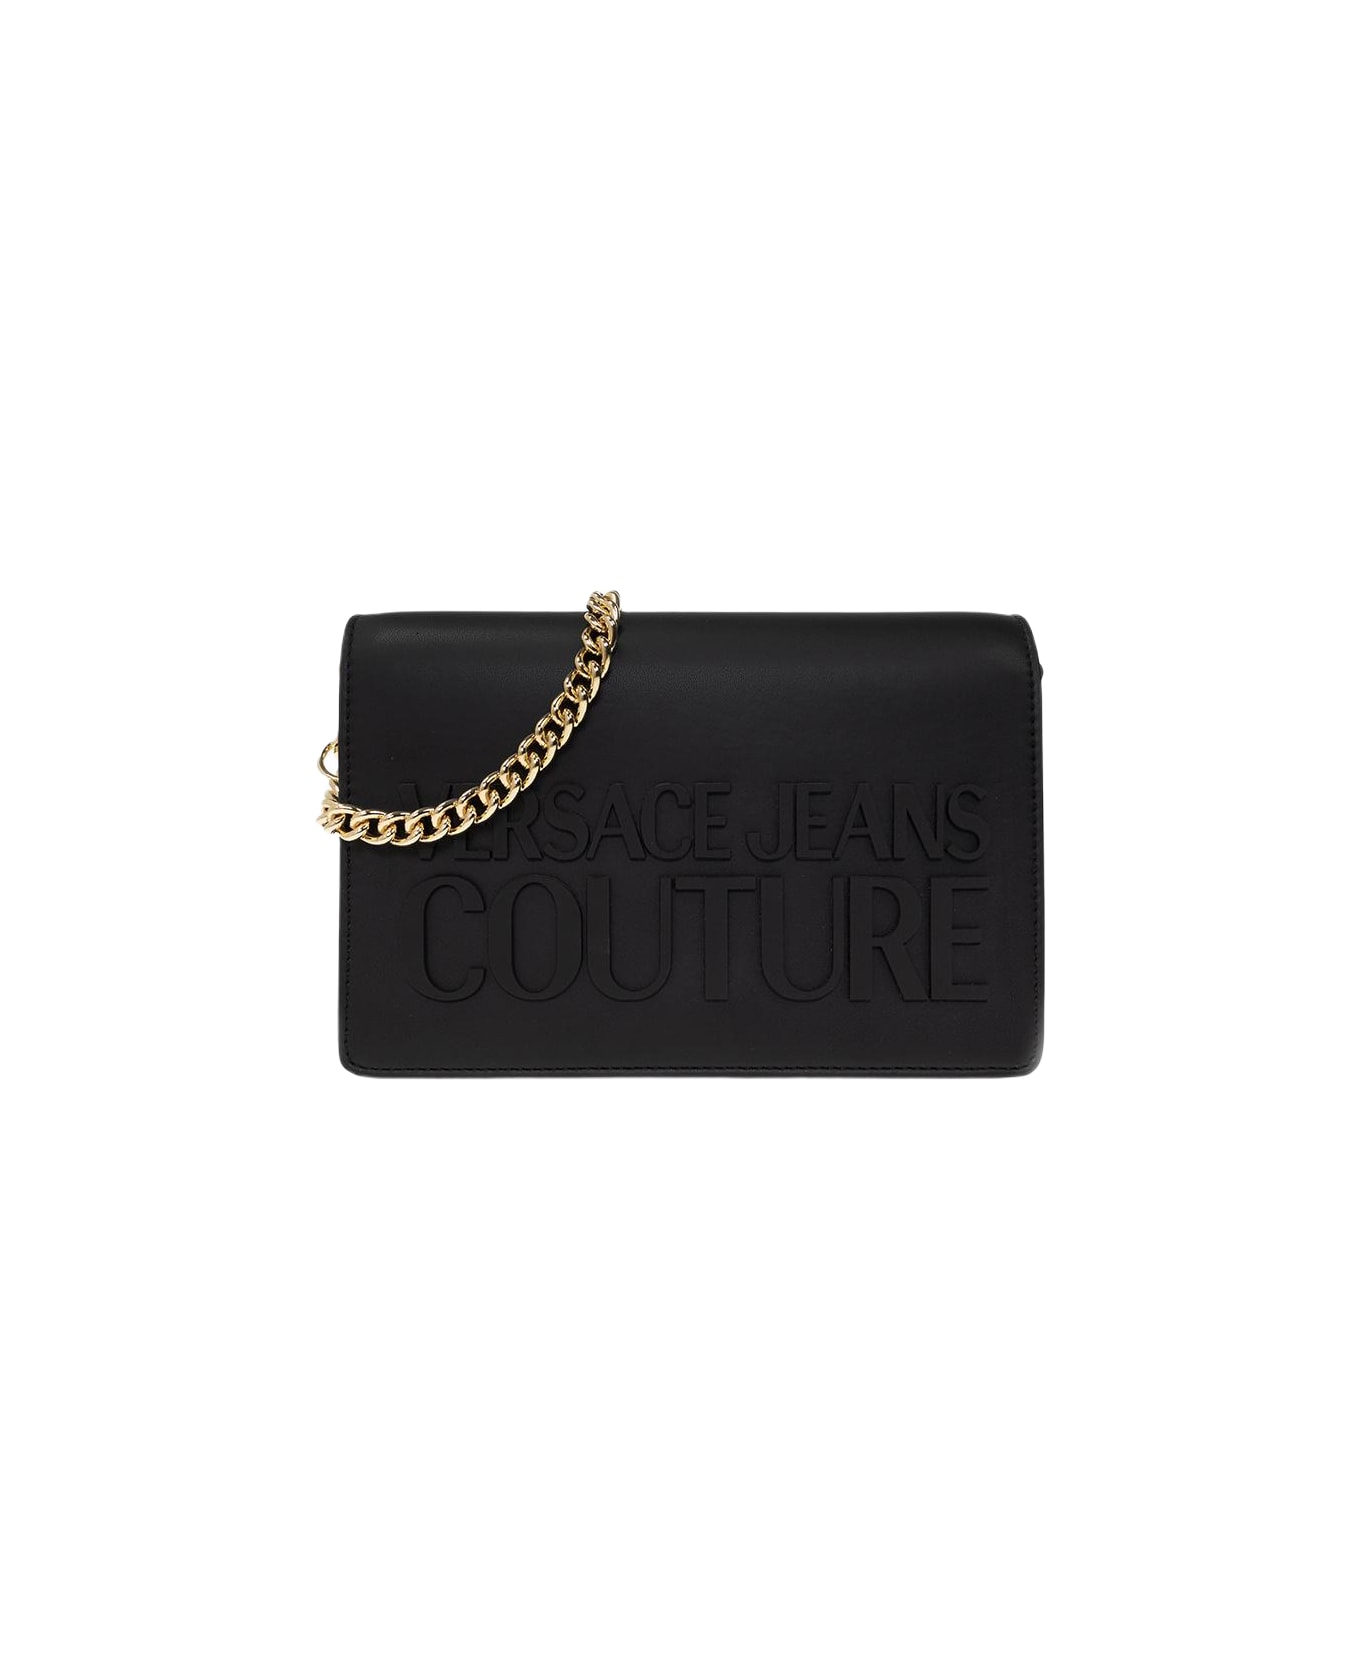 Versace Jeans Couture Bag - NERO クラッチバッグ